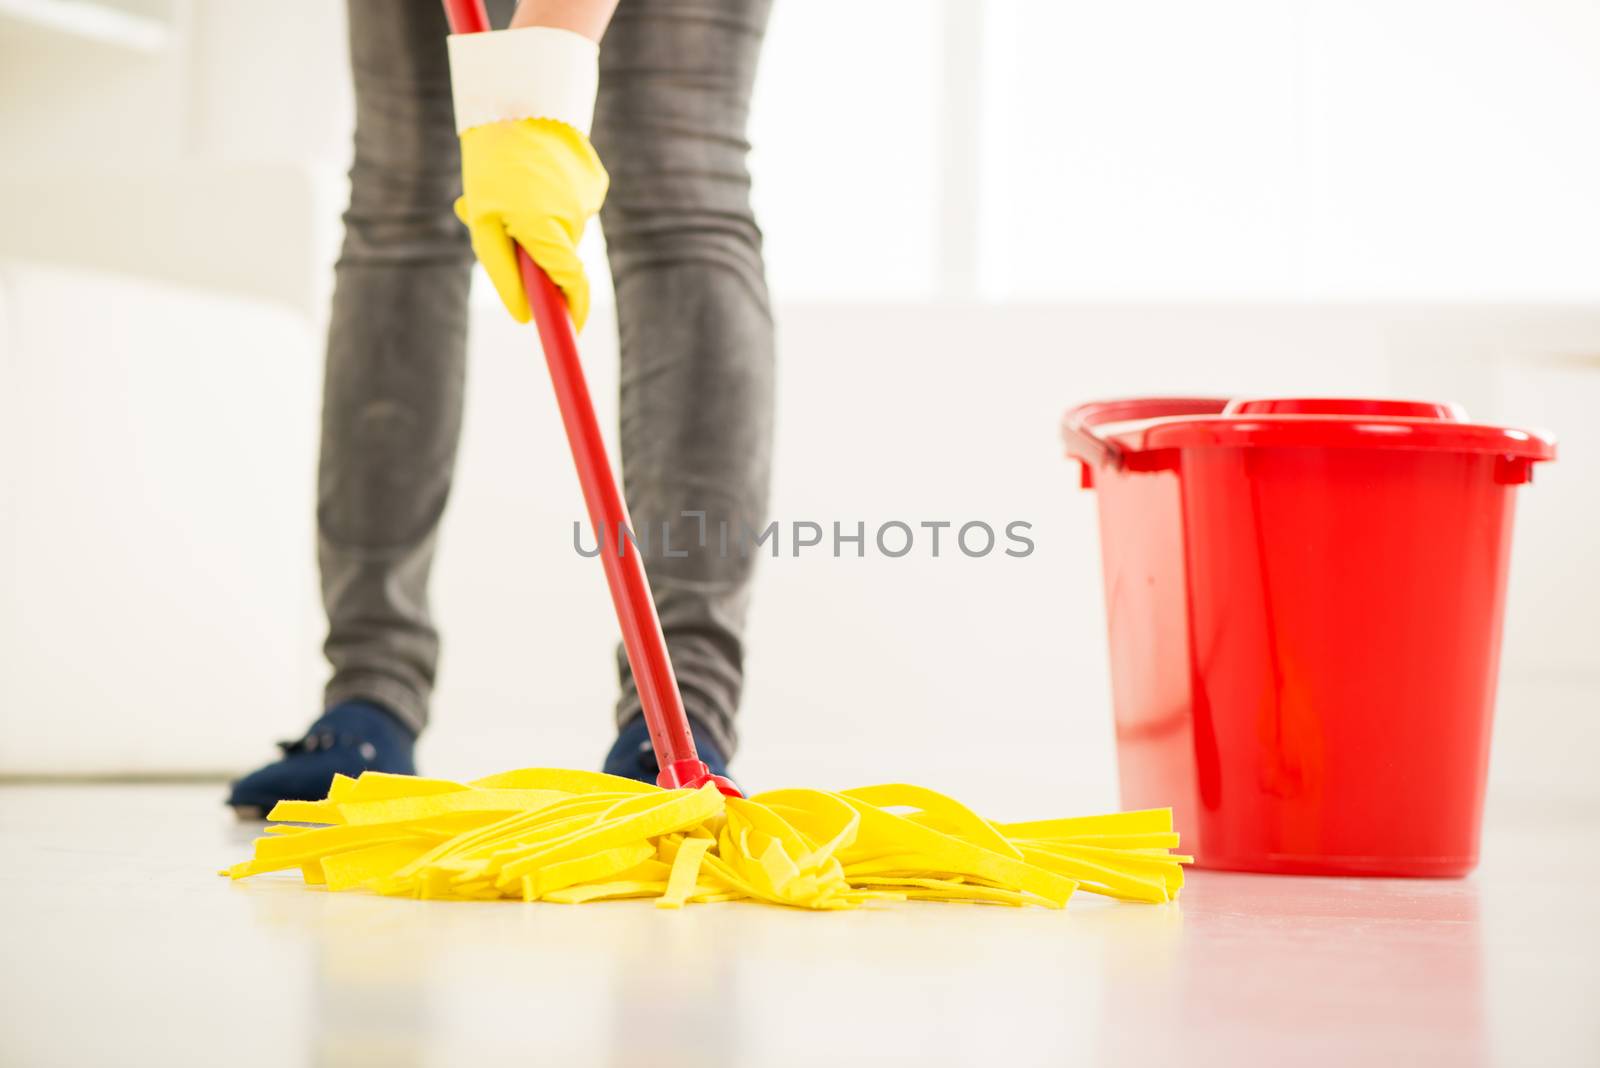 Cleaning home by MilanMarkovic78